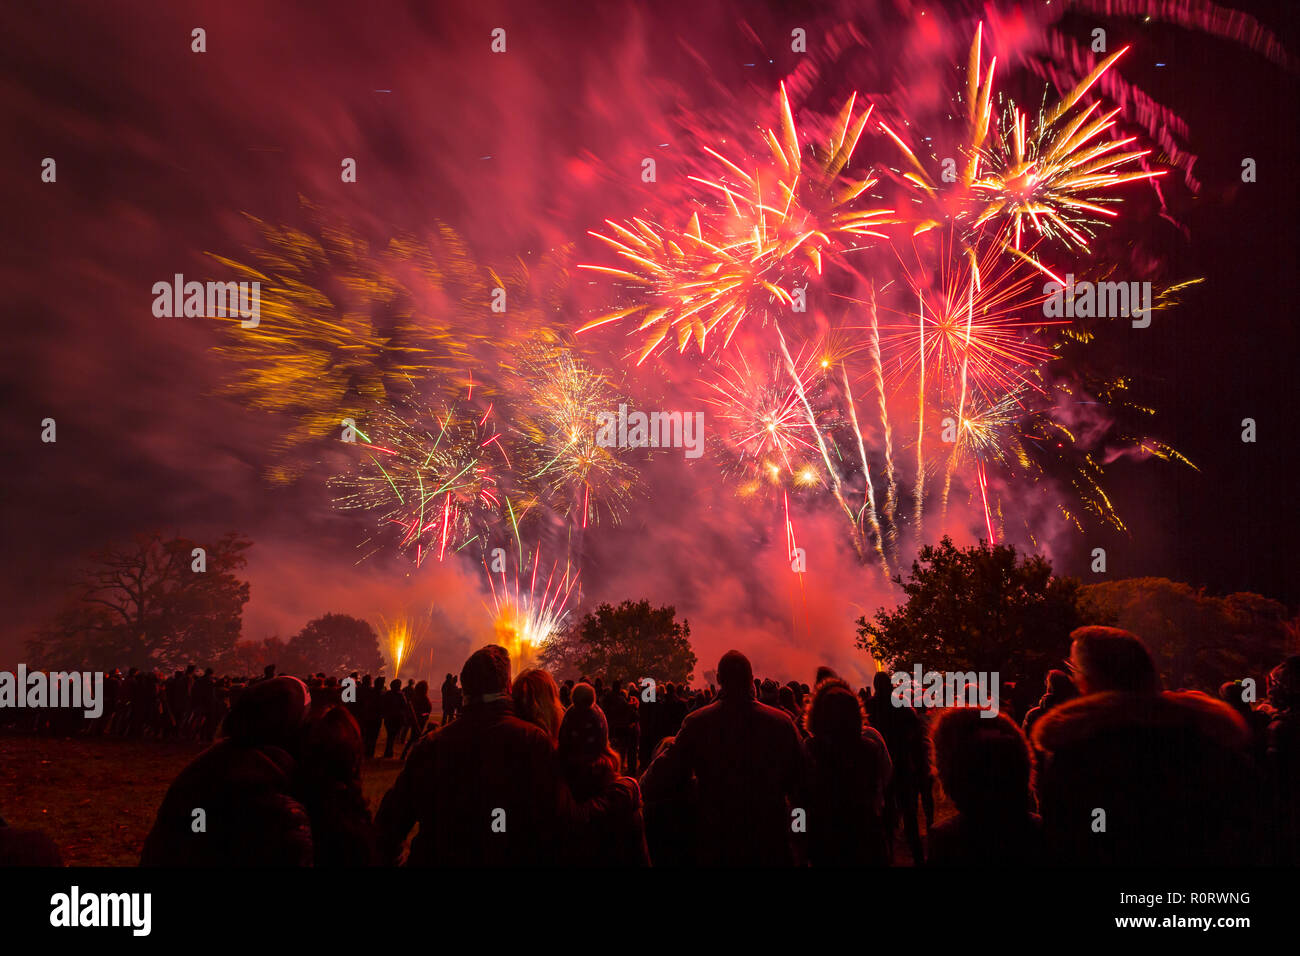 People watching a fireworks display at Helvingham Hall, Suffolk, UK. Stock Photo